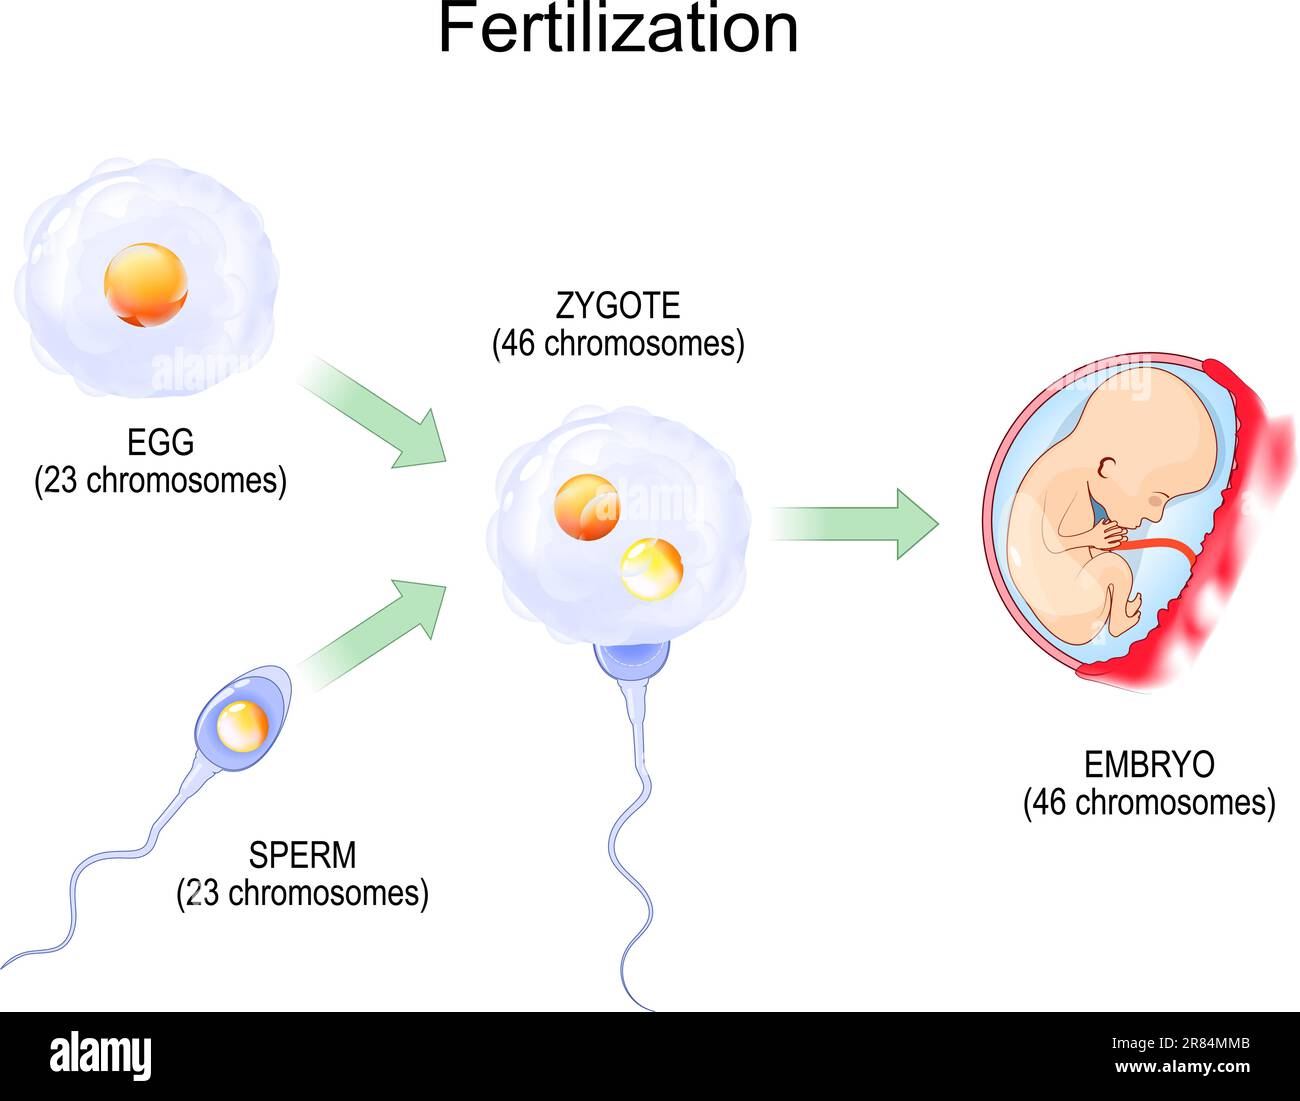 Fertilization. Fertilisation. Zygote is egg plus sperm. Fusion of two haploid gametes to form a diploid zygote then Embryo. vector illustration. Biolo Stock Vector